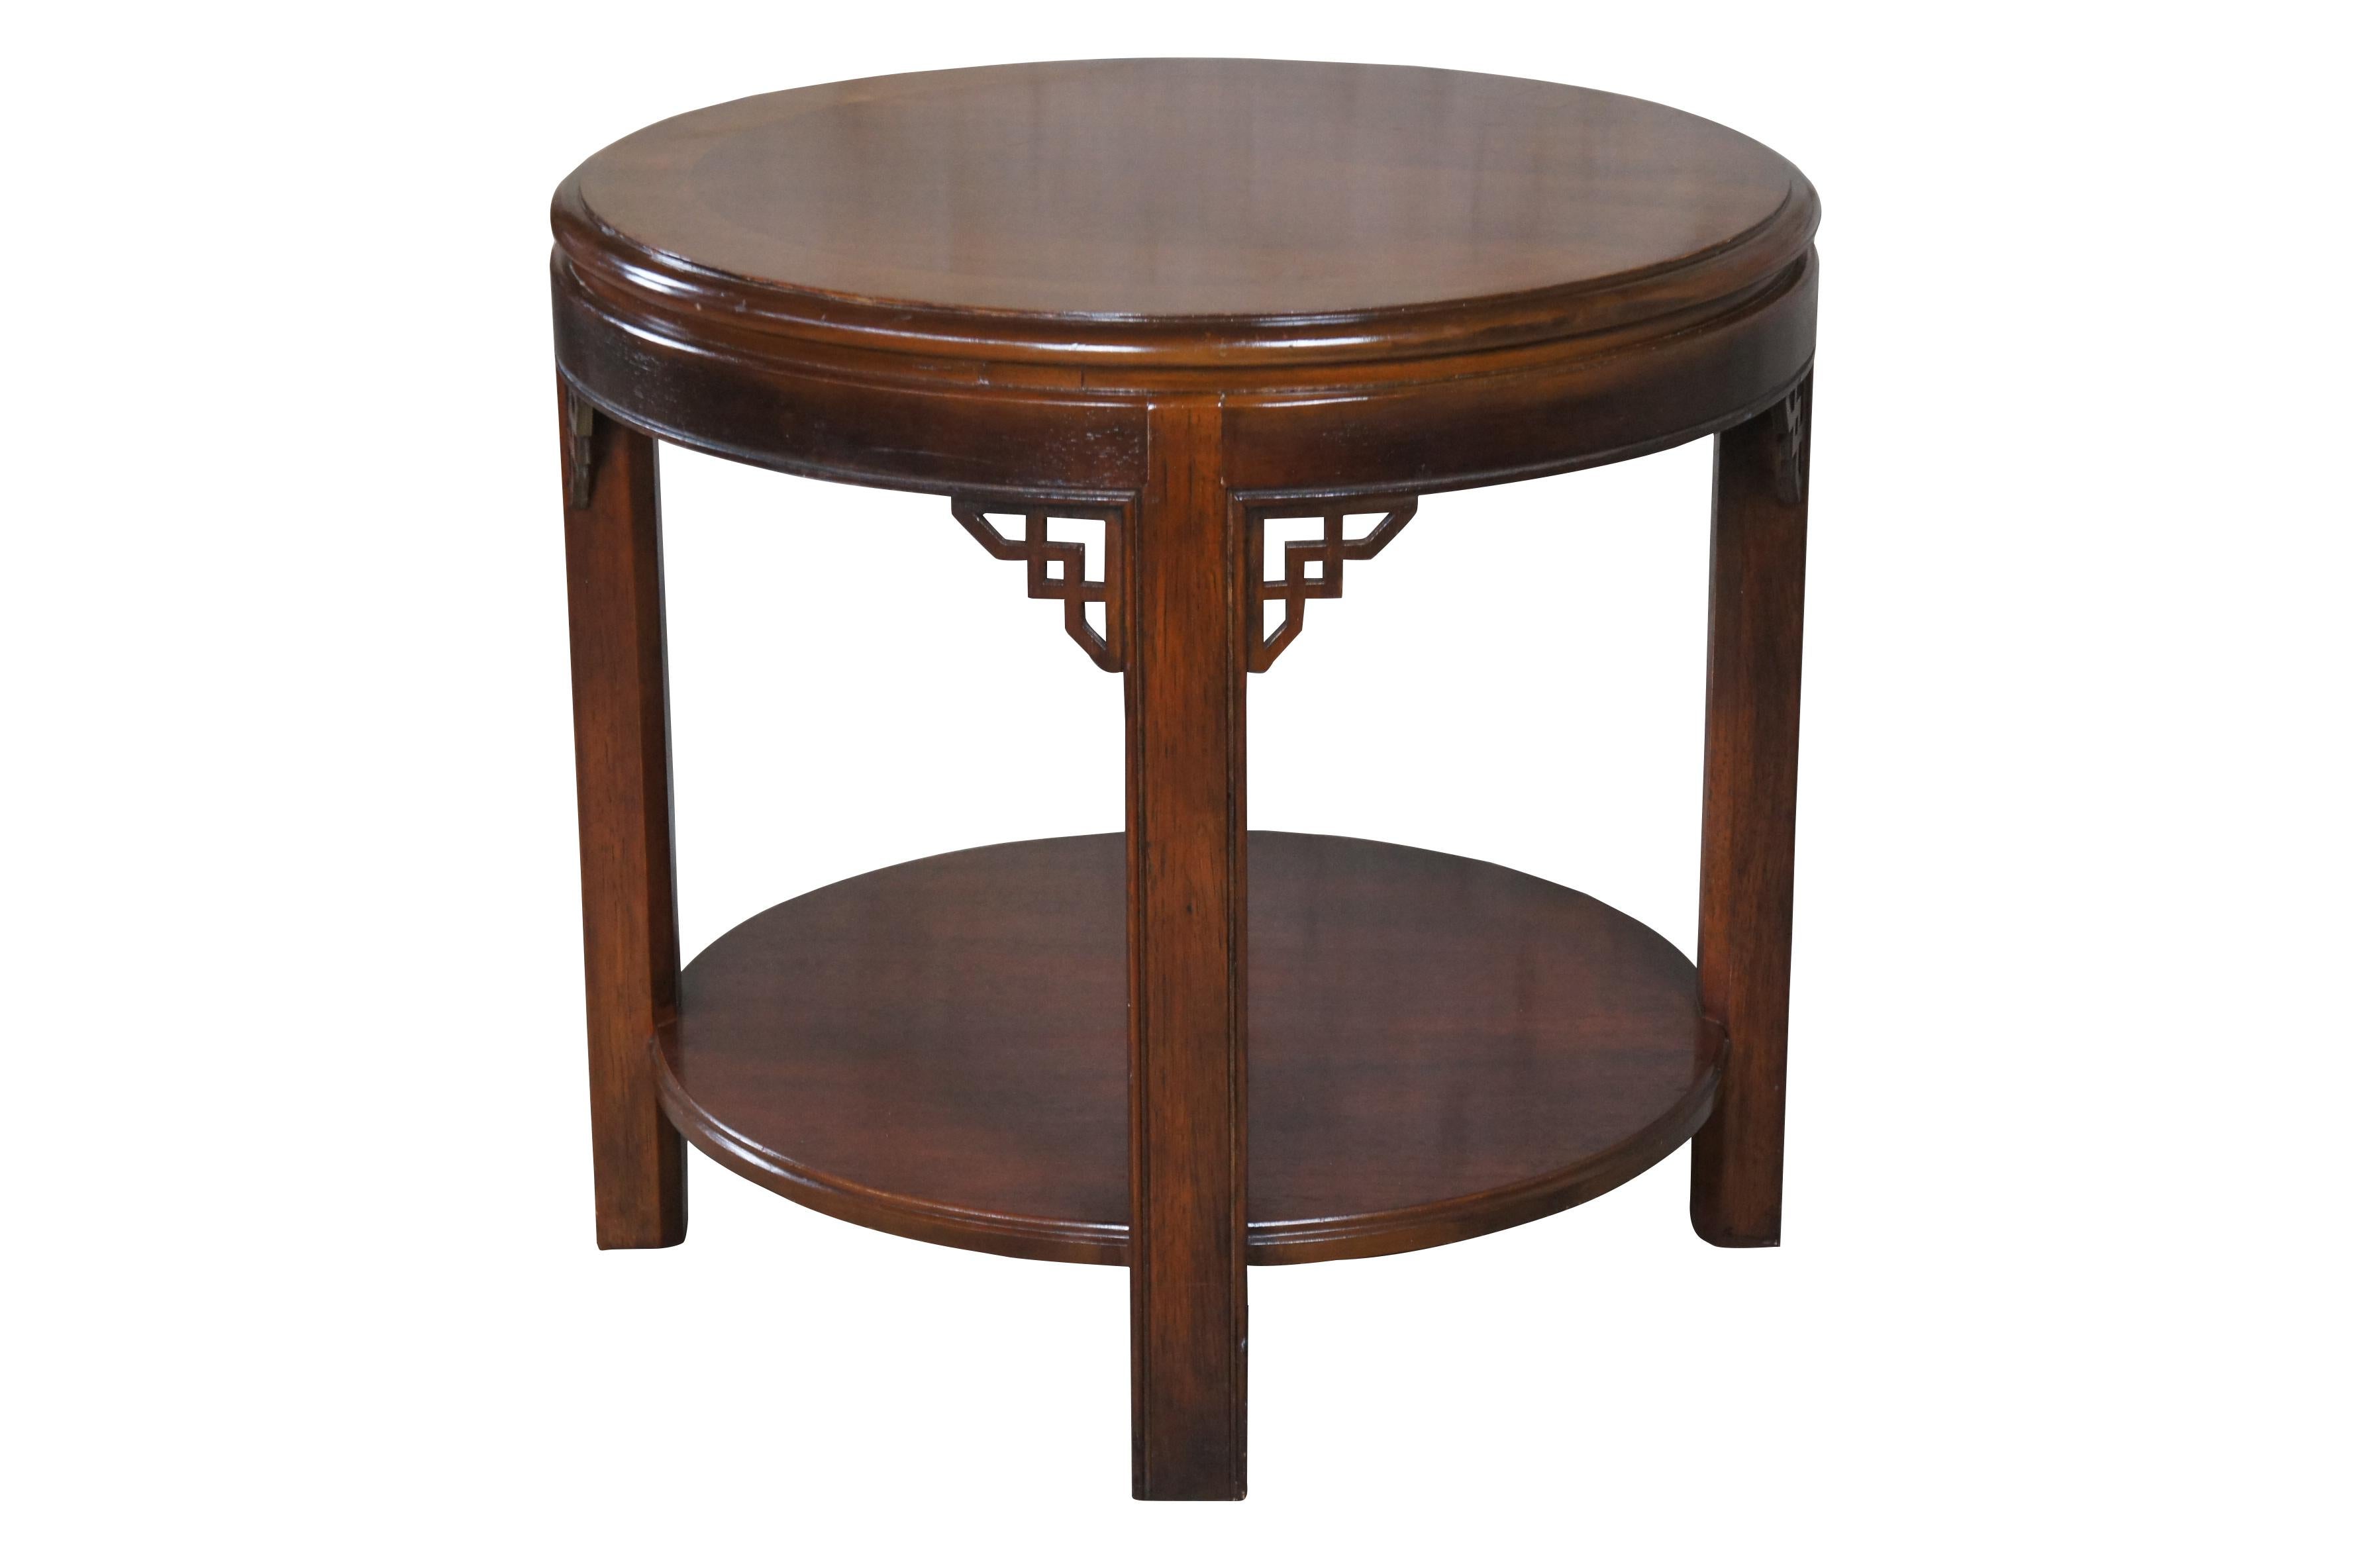 Drexel Chinese Chippendale Mahogany Tiered Round Accent Table w Fretwork 24